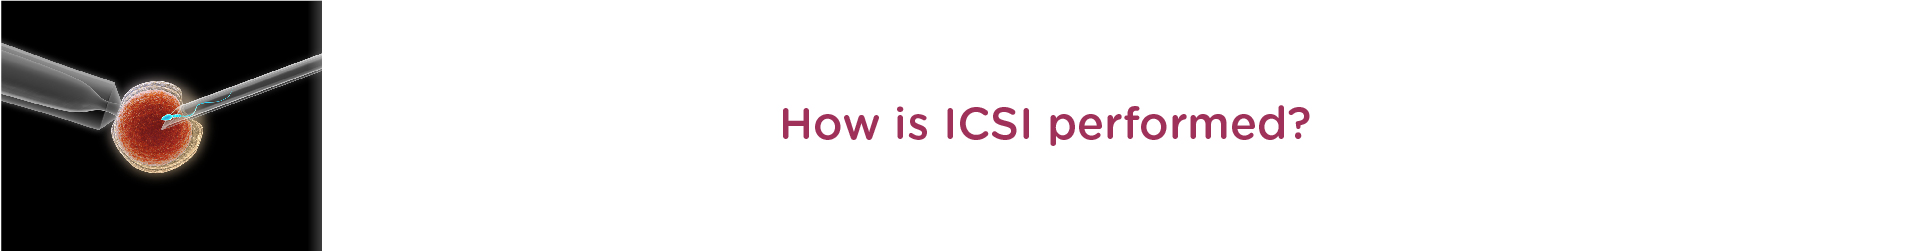 How is ICSI Performed?